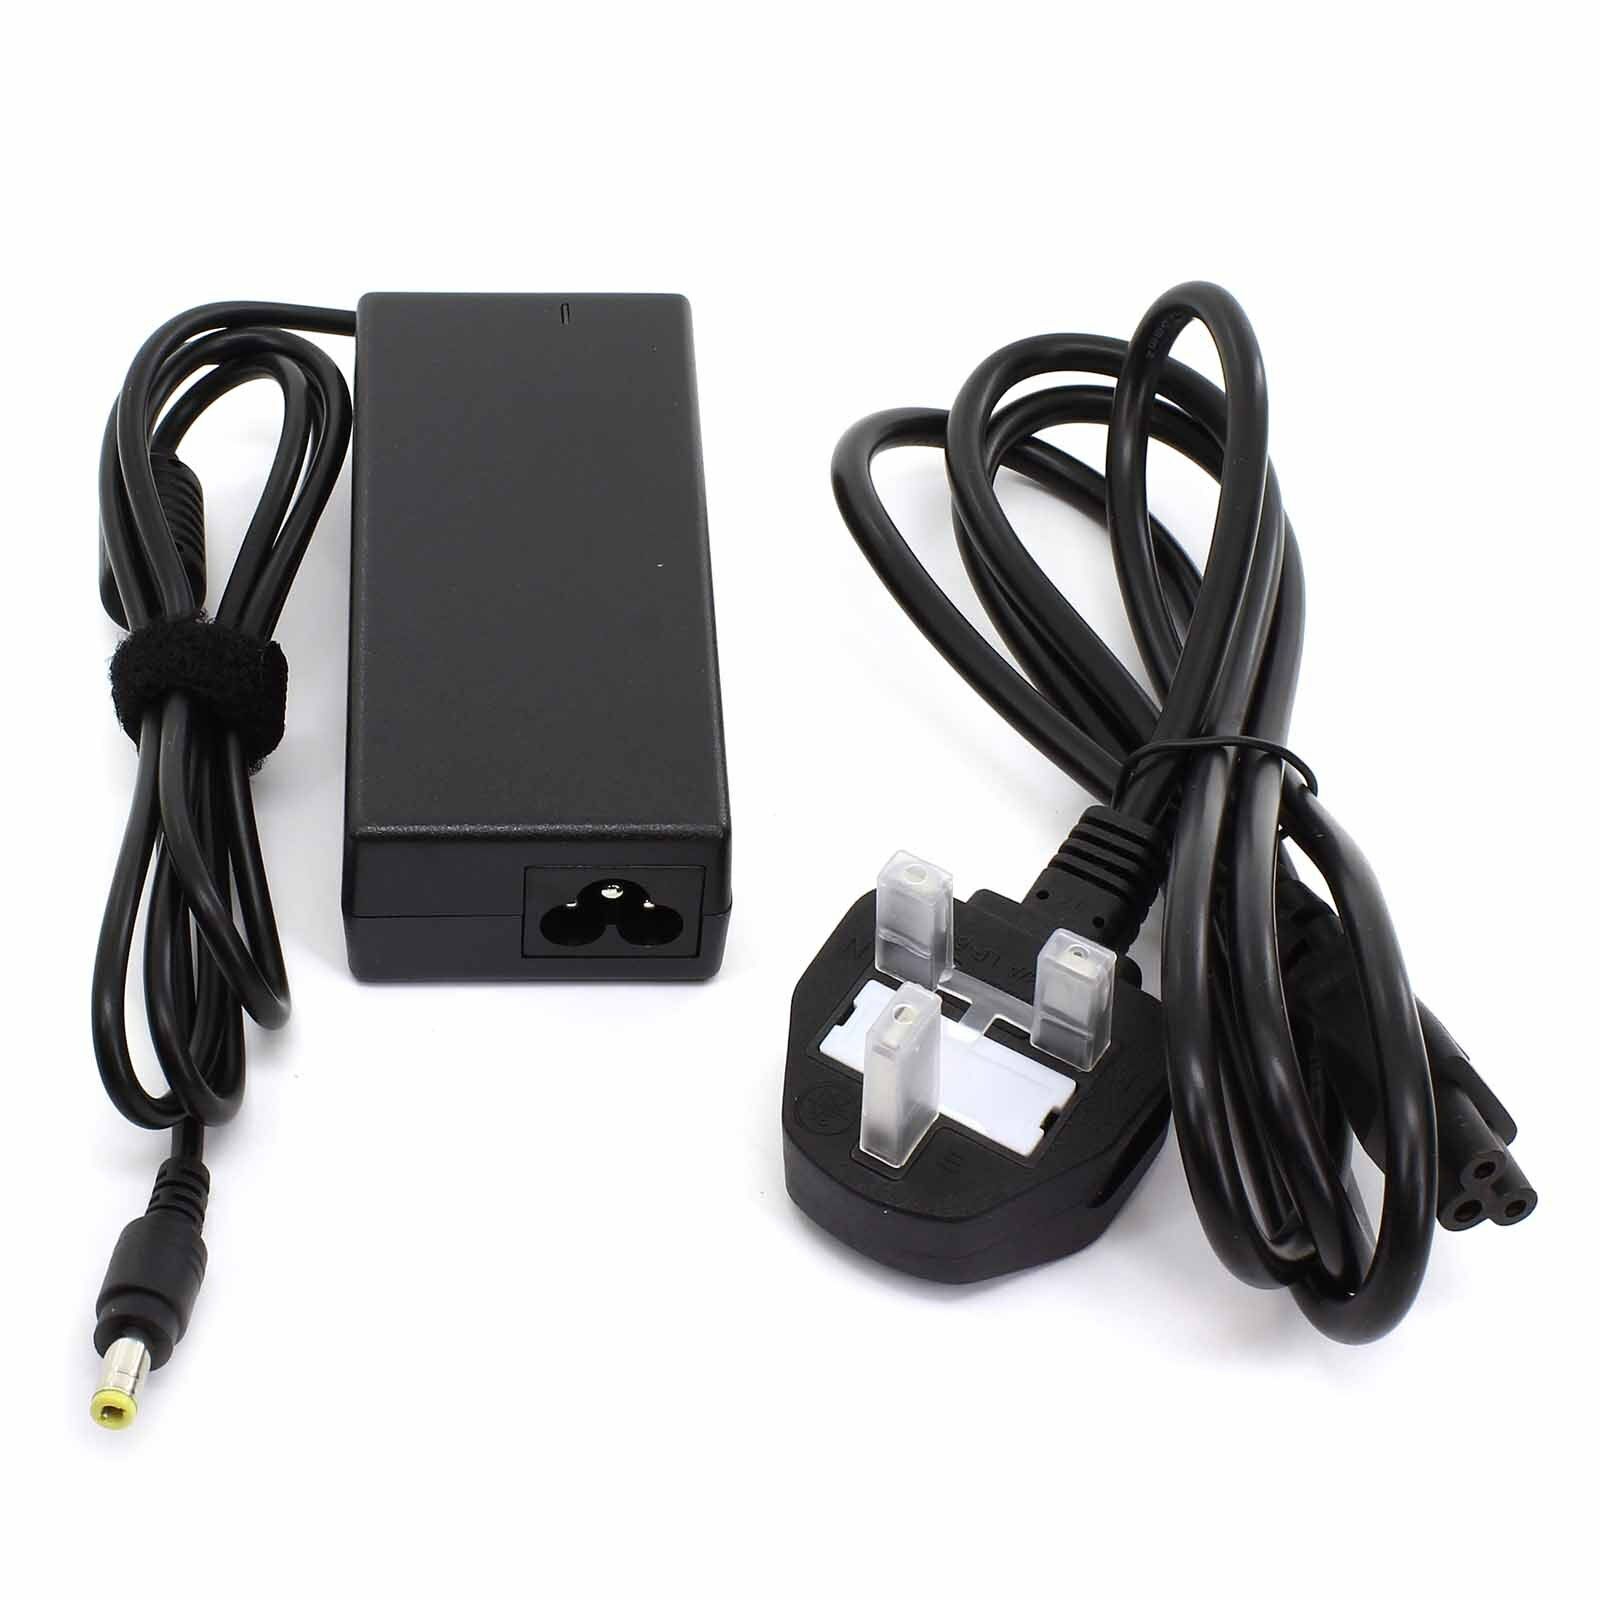 *Brand NEW*APD DA-34A02 AC Adapter For Asian Power Devices 5Vdc 2A 12Vdc 2A Power Supply Cord - Click Image to Close